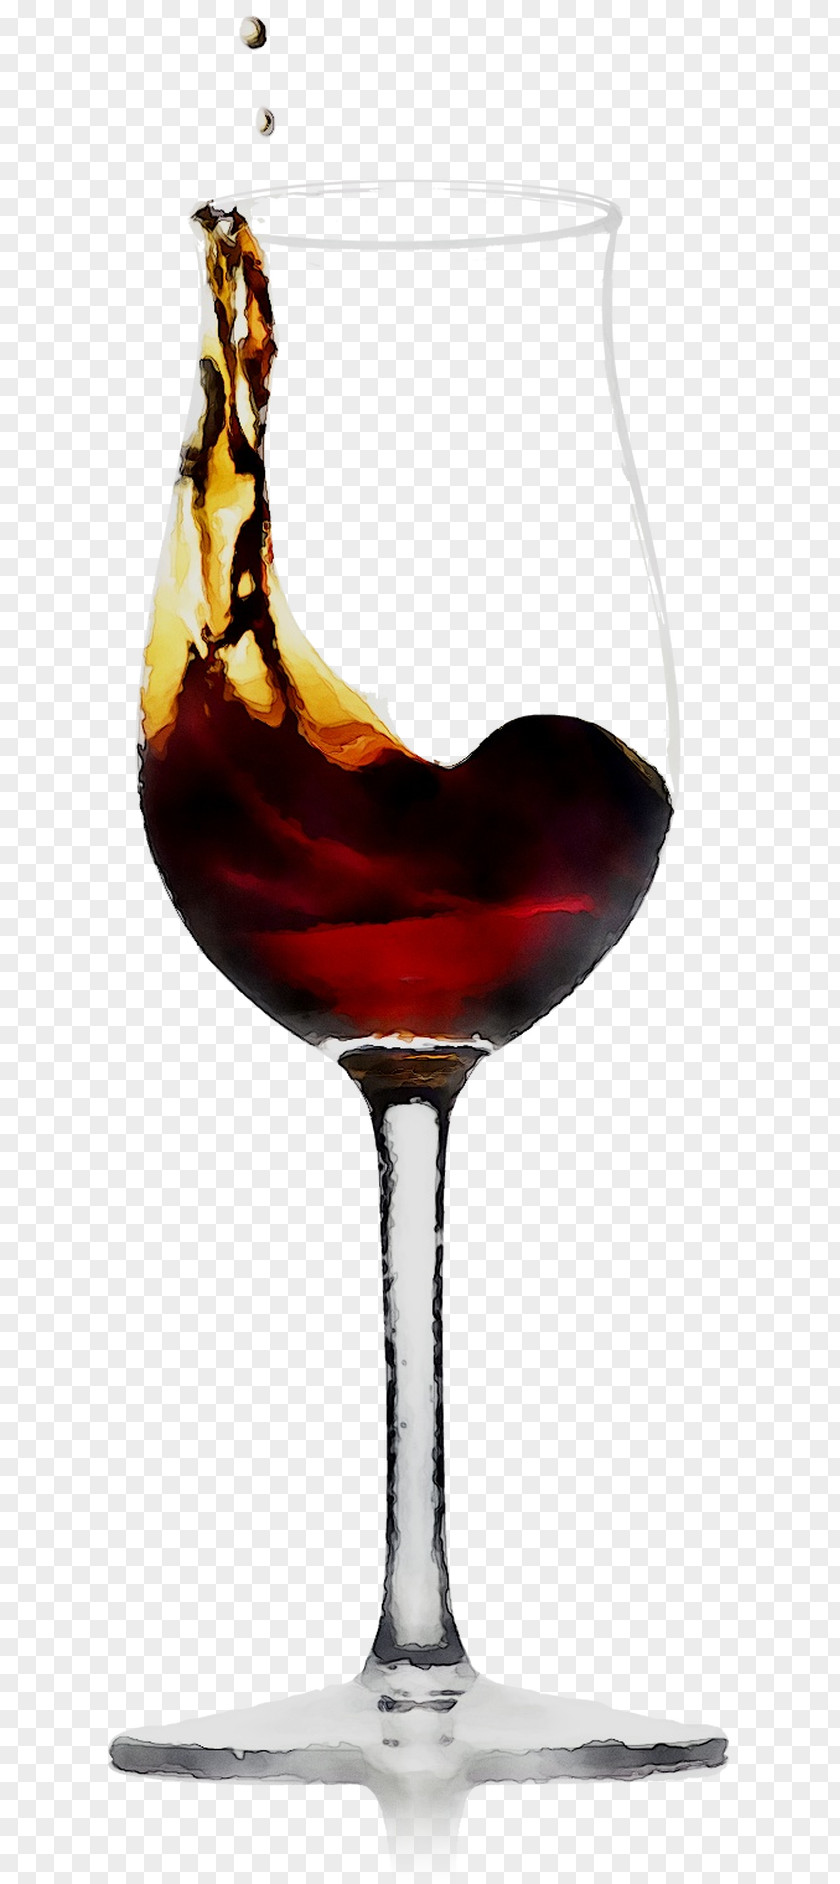 Wine Glass Champagne Alcoholic Beverages Drink PNG